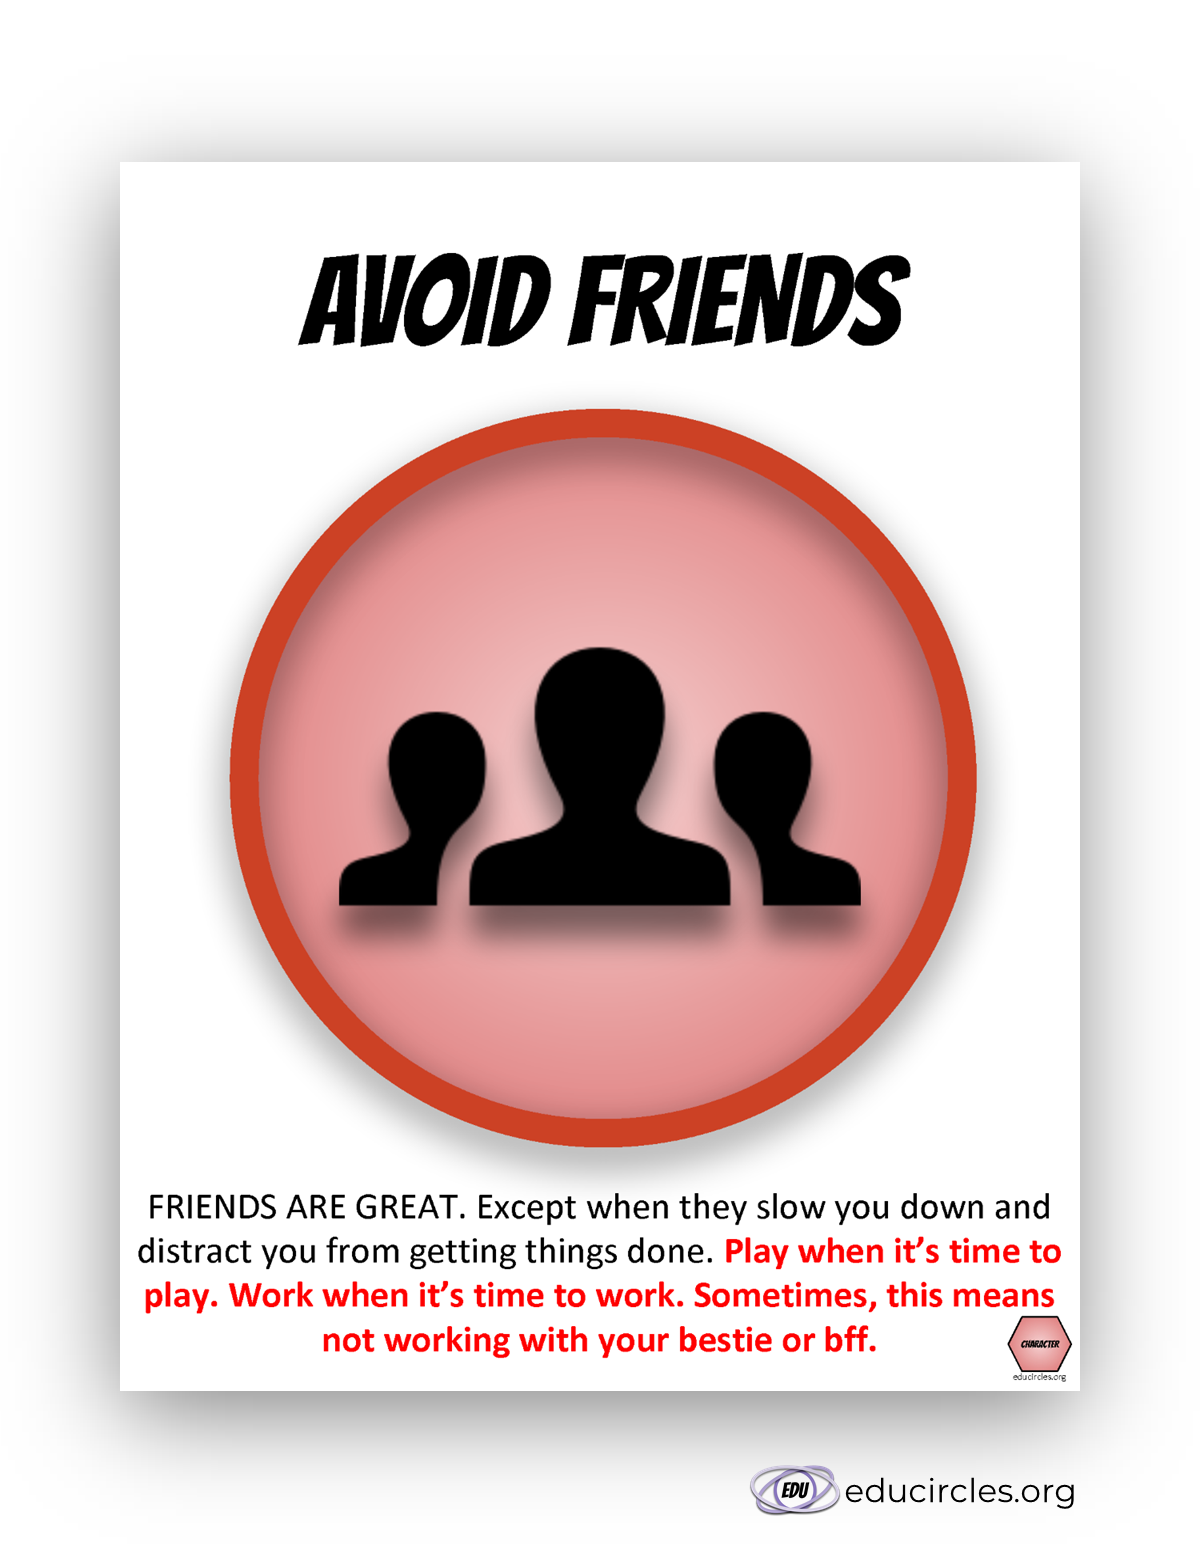 FREE Growth Mindset Poster PDF slide 10 - strategy: avoid friends